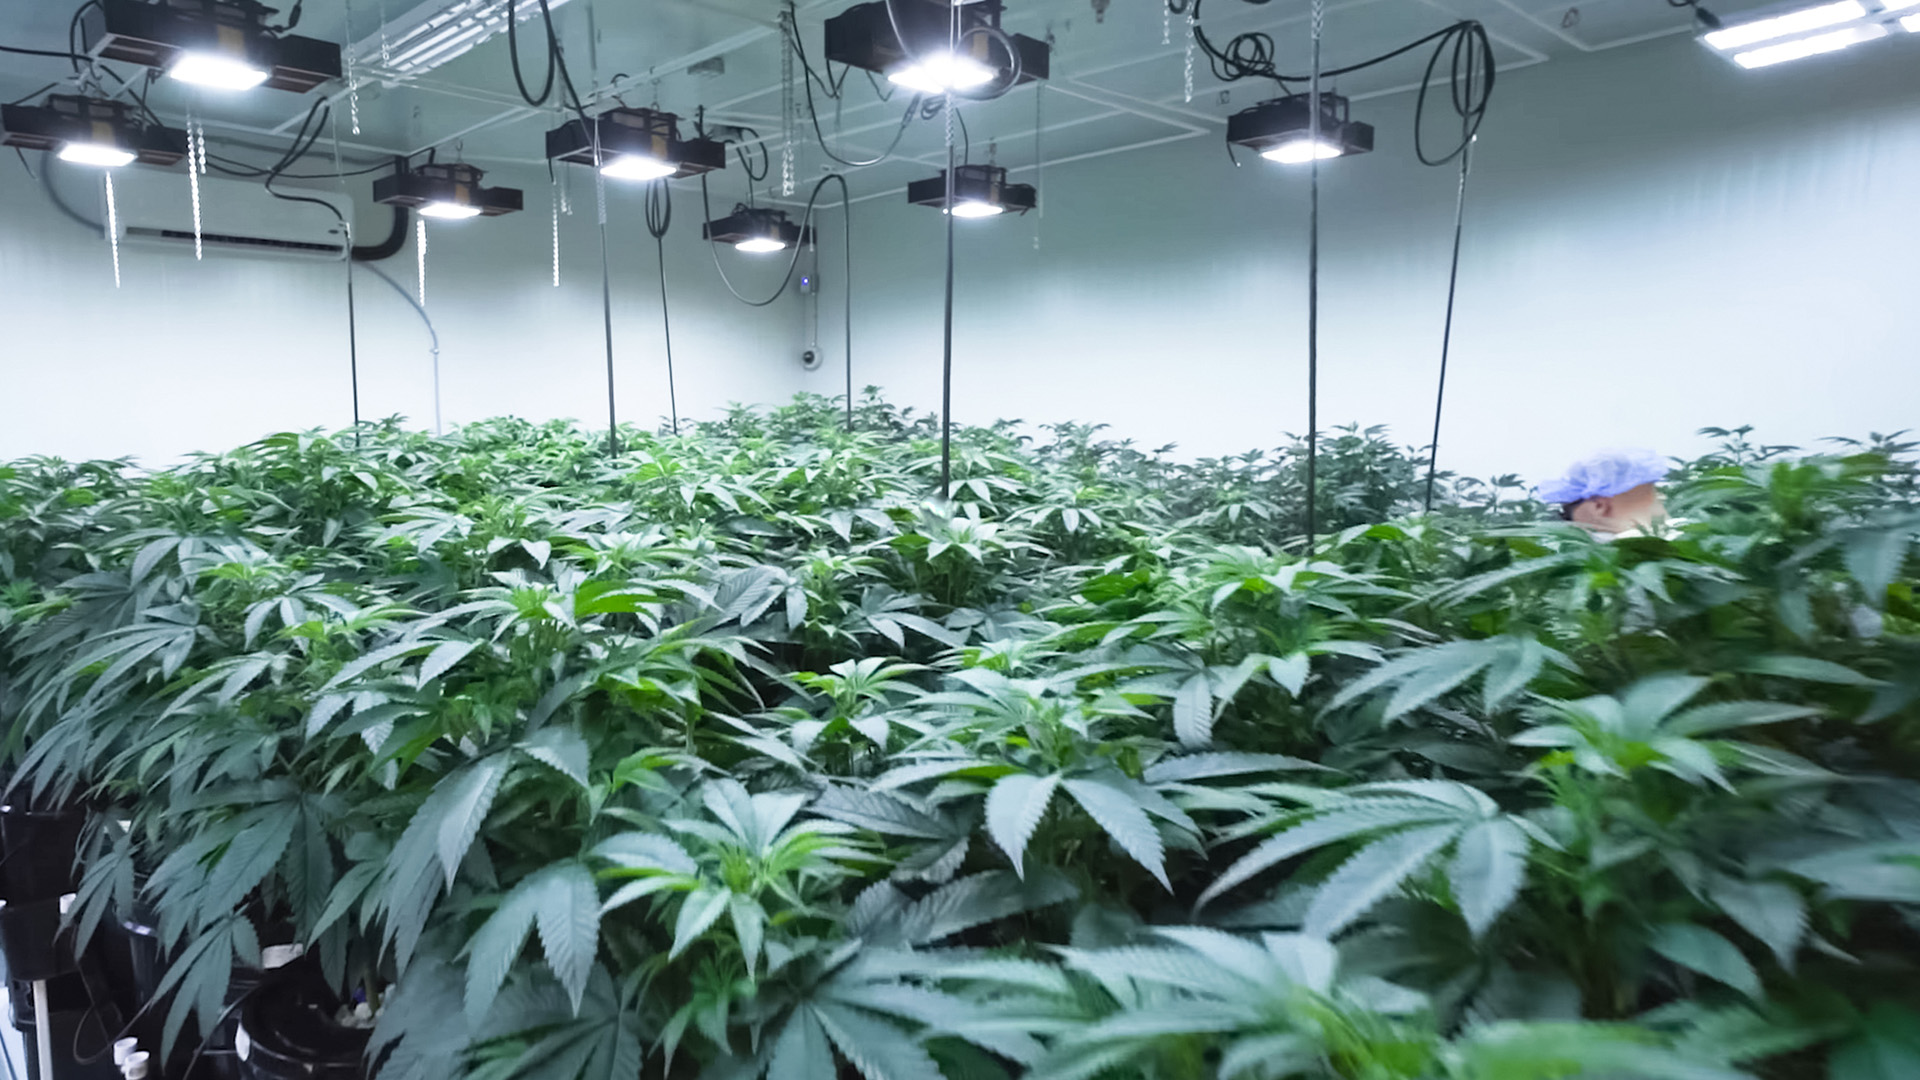 Cannabis plants growing in an indoor facility